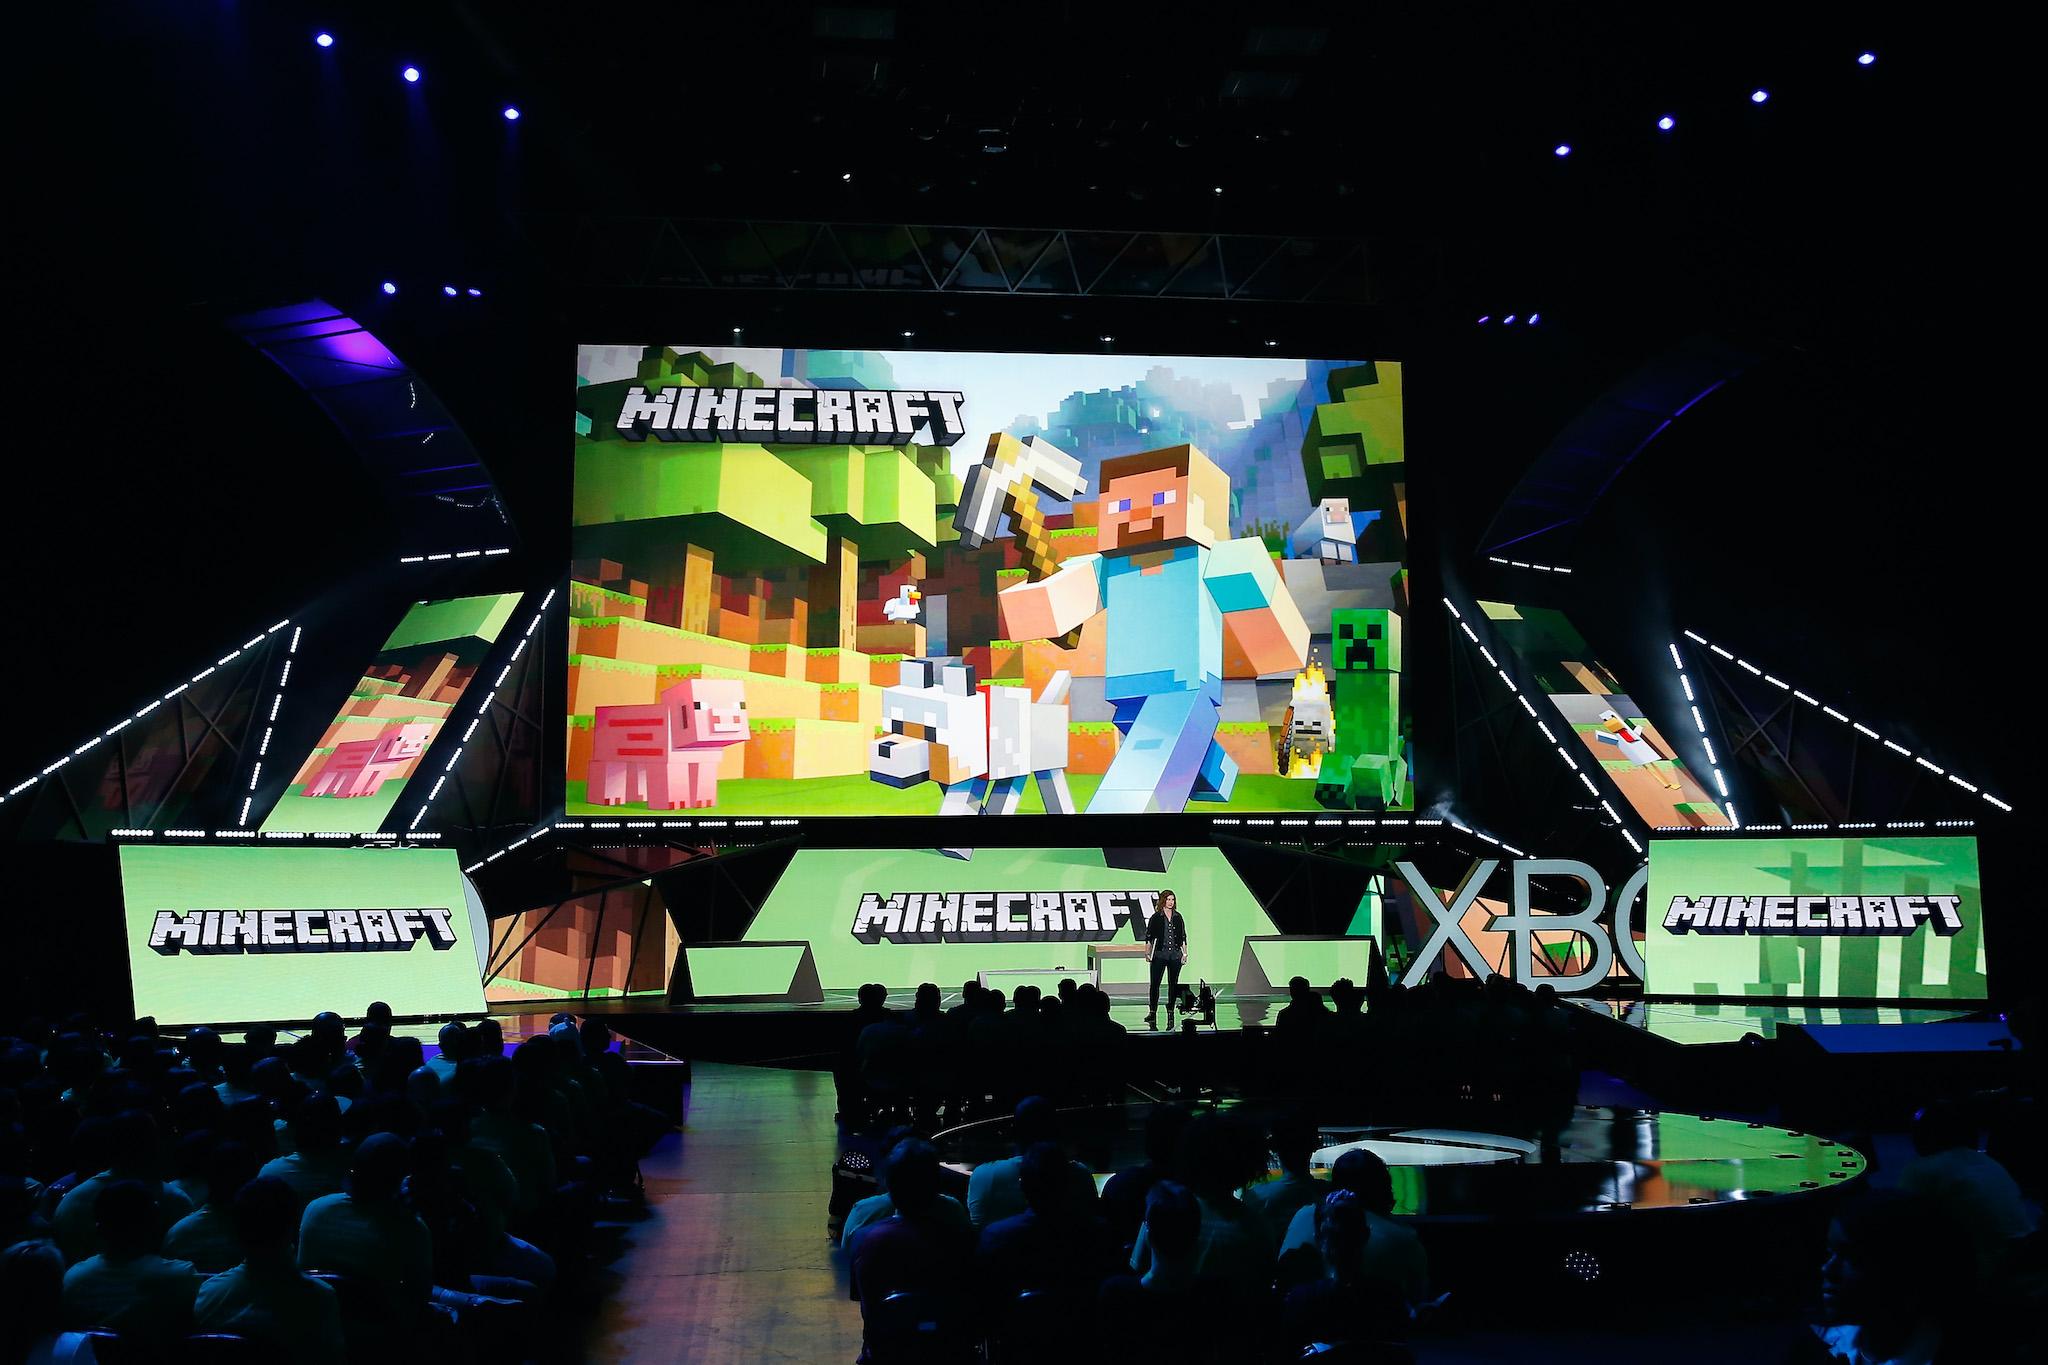 Is Minecraft Shutting Down Rumours About Servers Being Switched Off Spark Panic Among Players The Independent The Independent - when is roblox shutting down march 22 2020 closure rumors